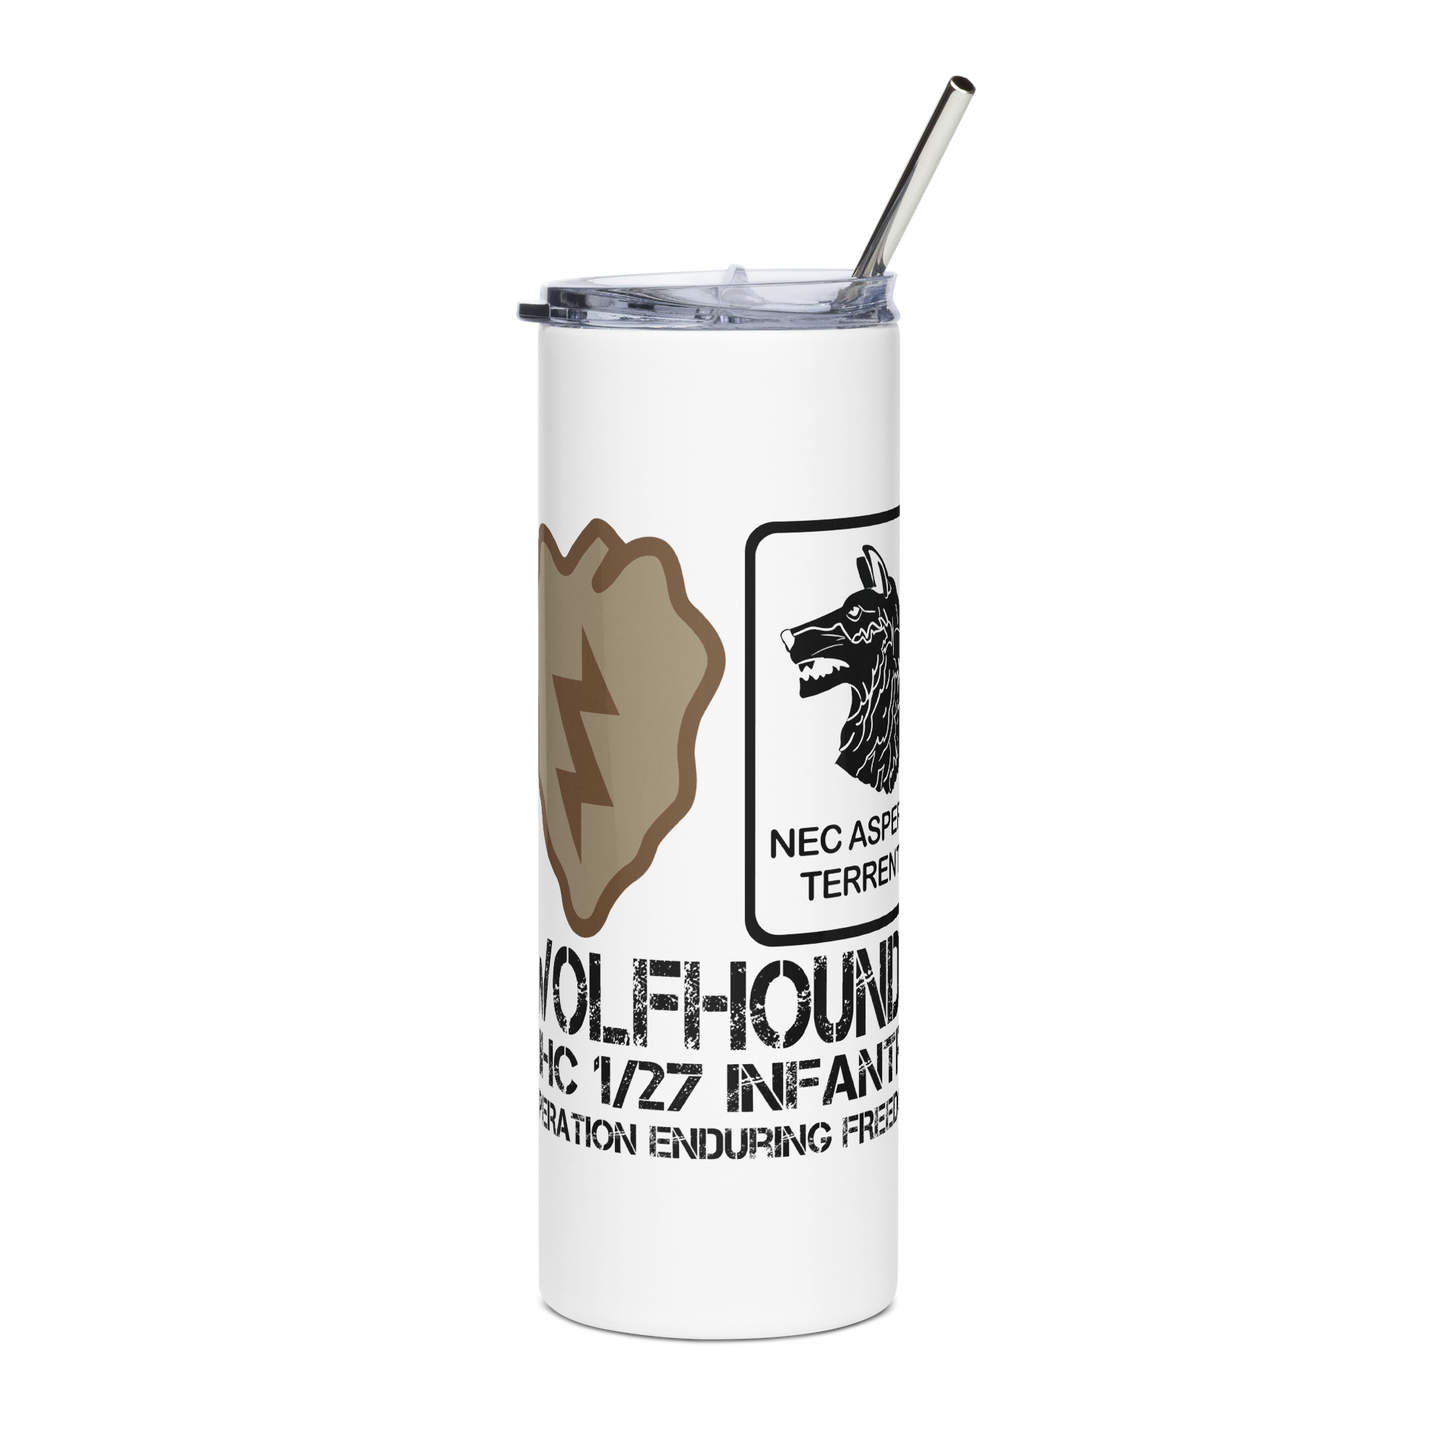 1/27 Infantry Wolfhounds OEF Tumbler